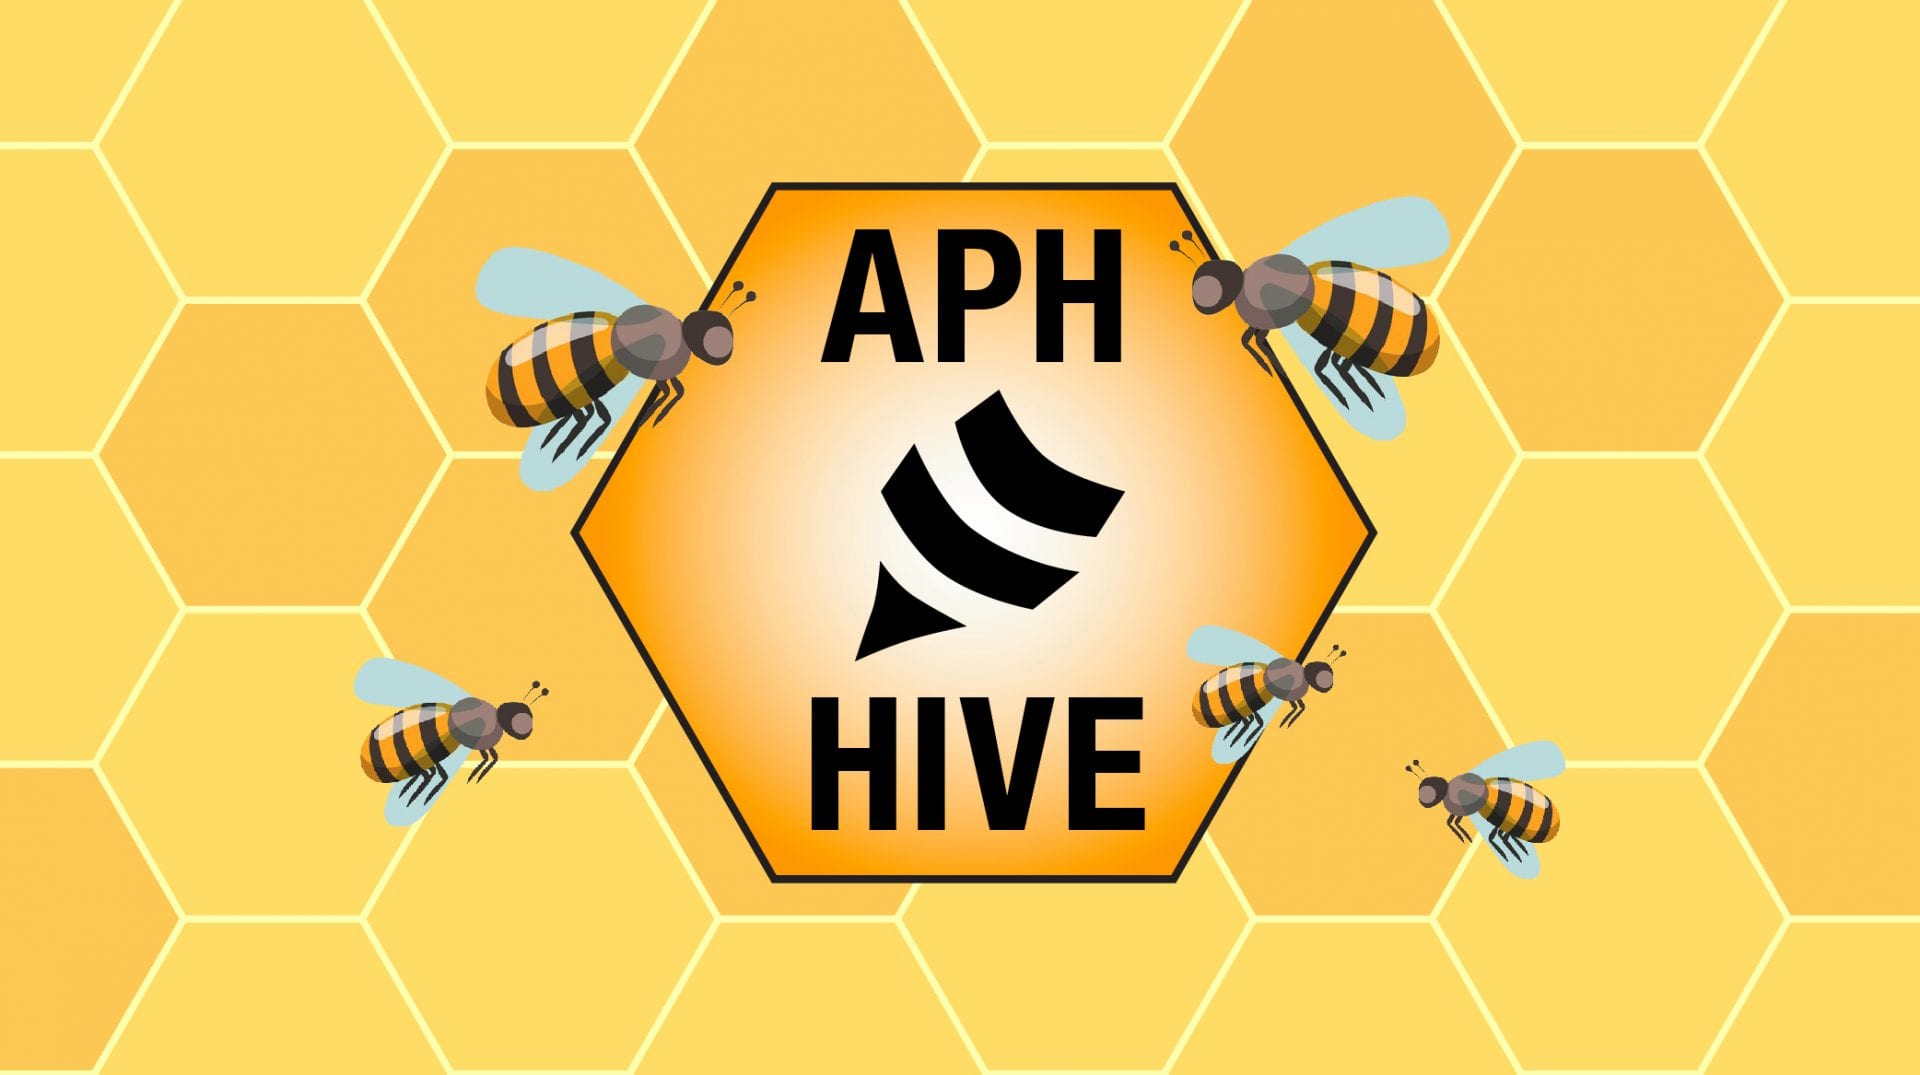 APH Hive logo on a honeycomb pattern background with cartoon bees flying around it.